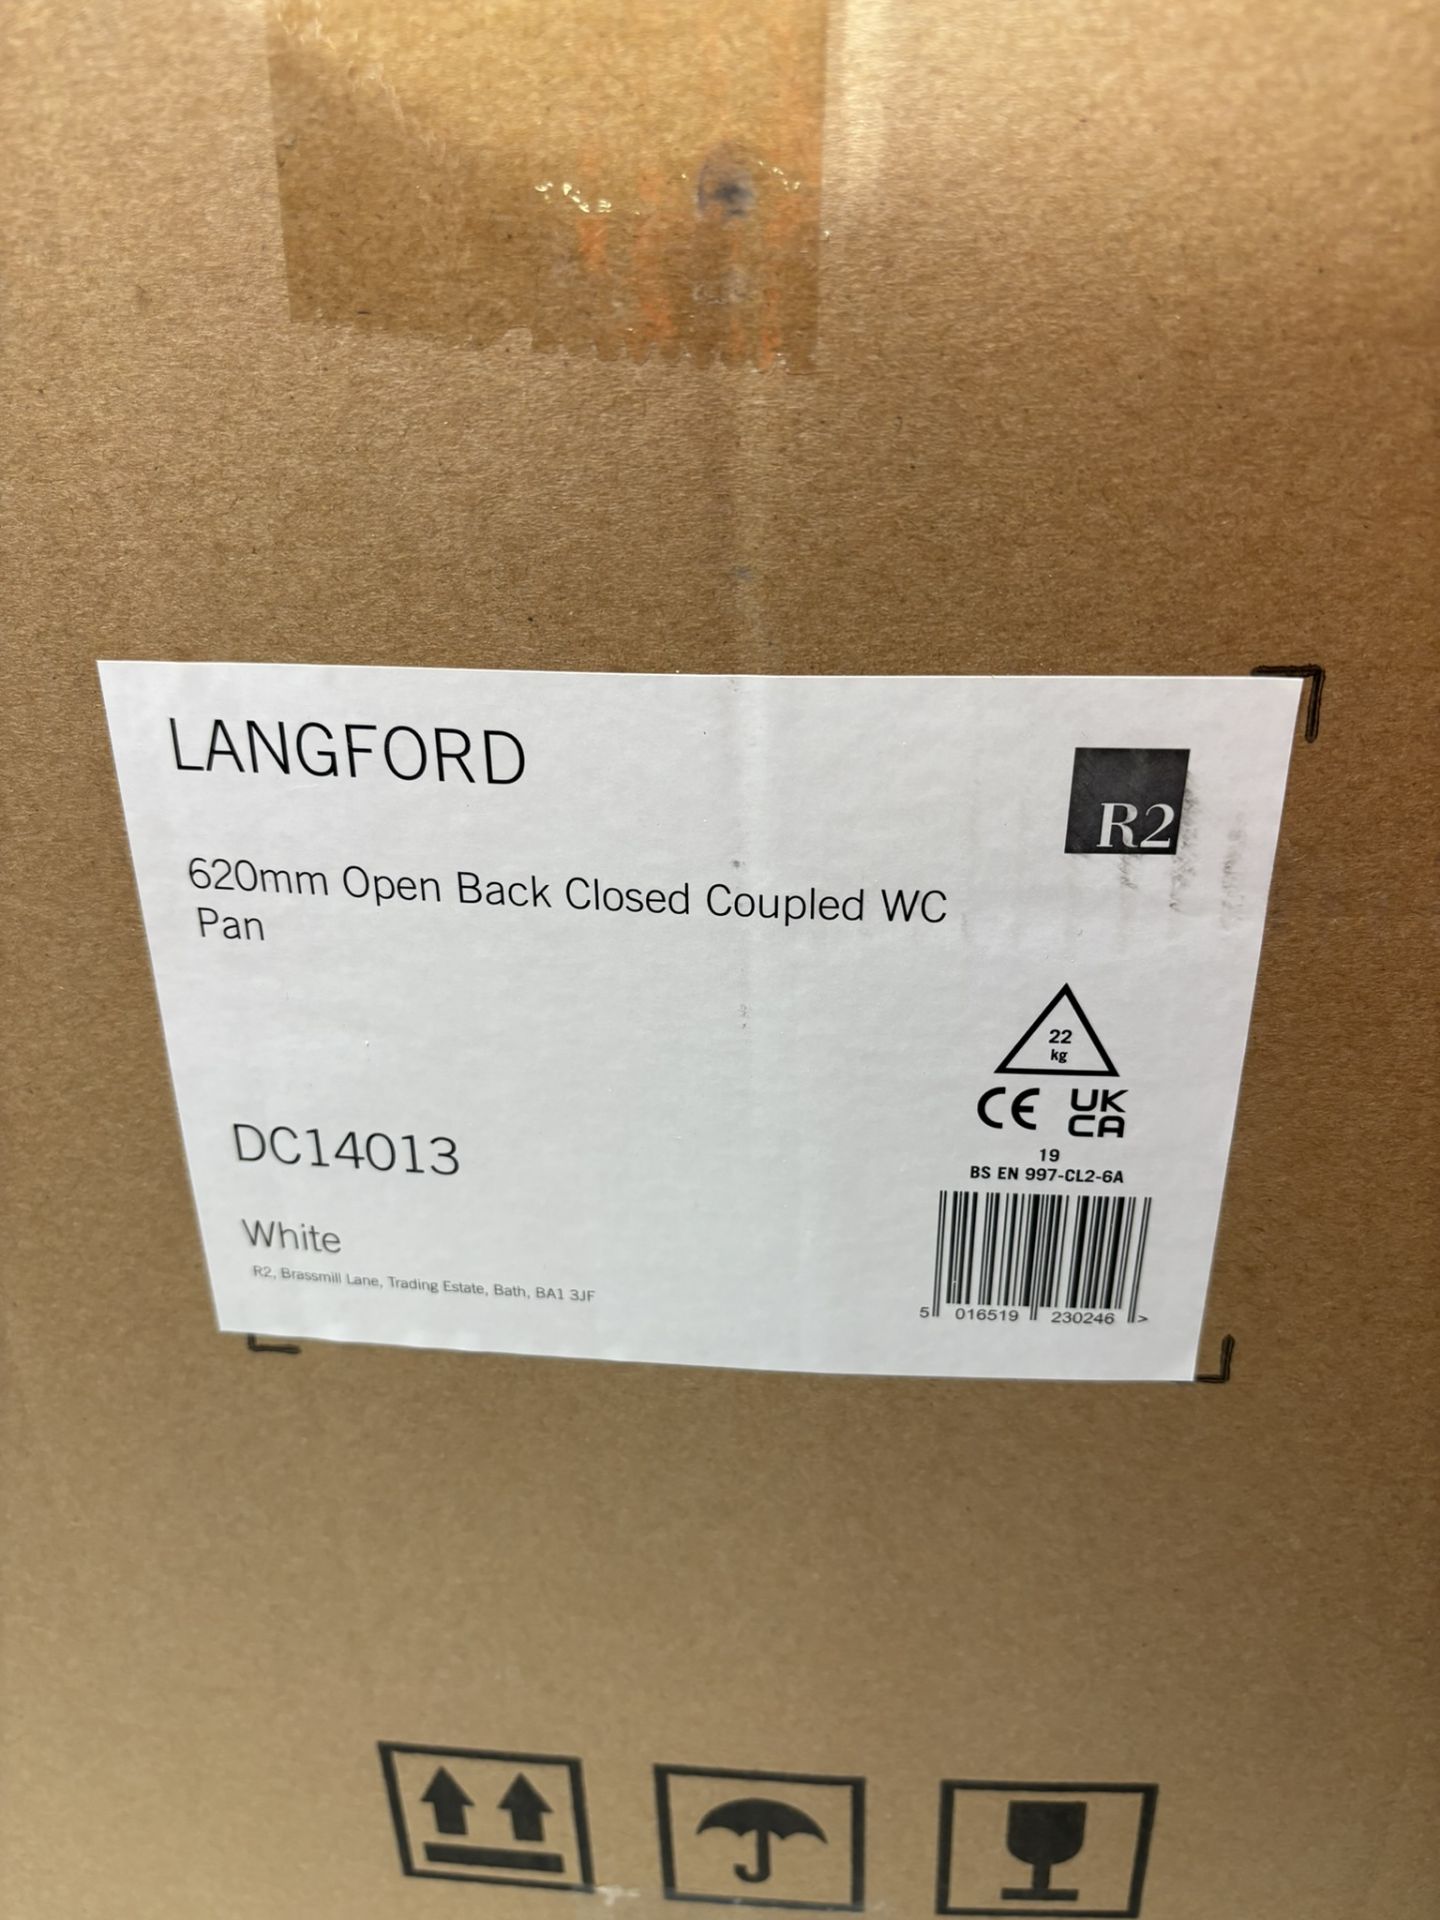 Langford 620mm Open Back Close Coupled Pan, White - Image 9 of 9